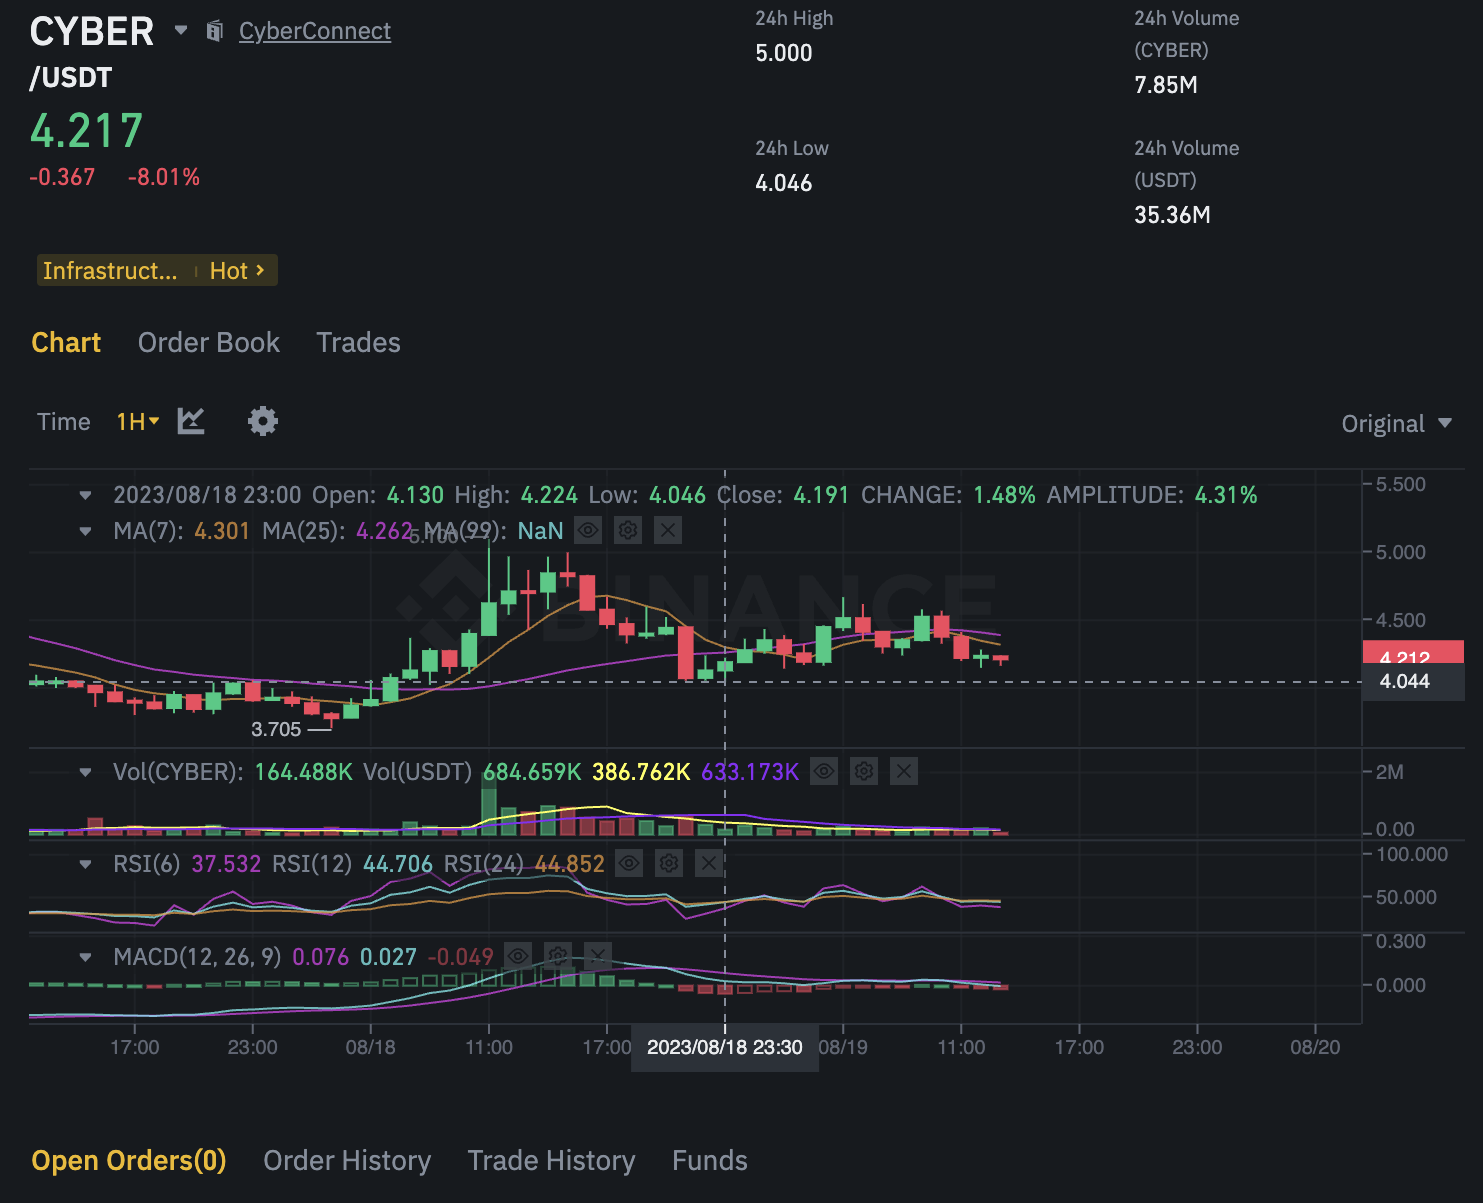 CyberConnect Price Analysis